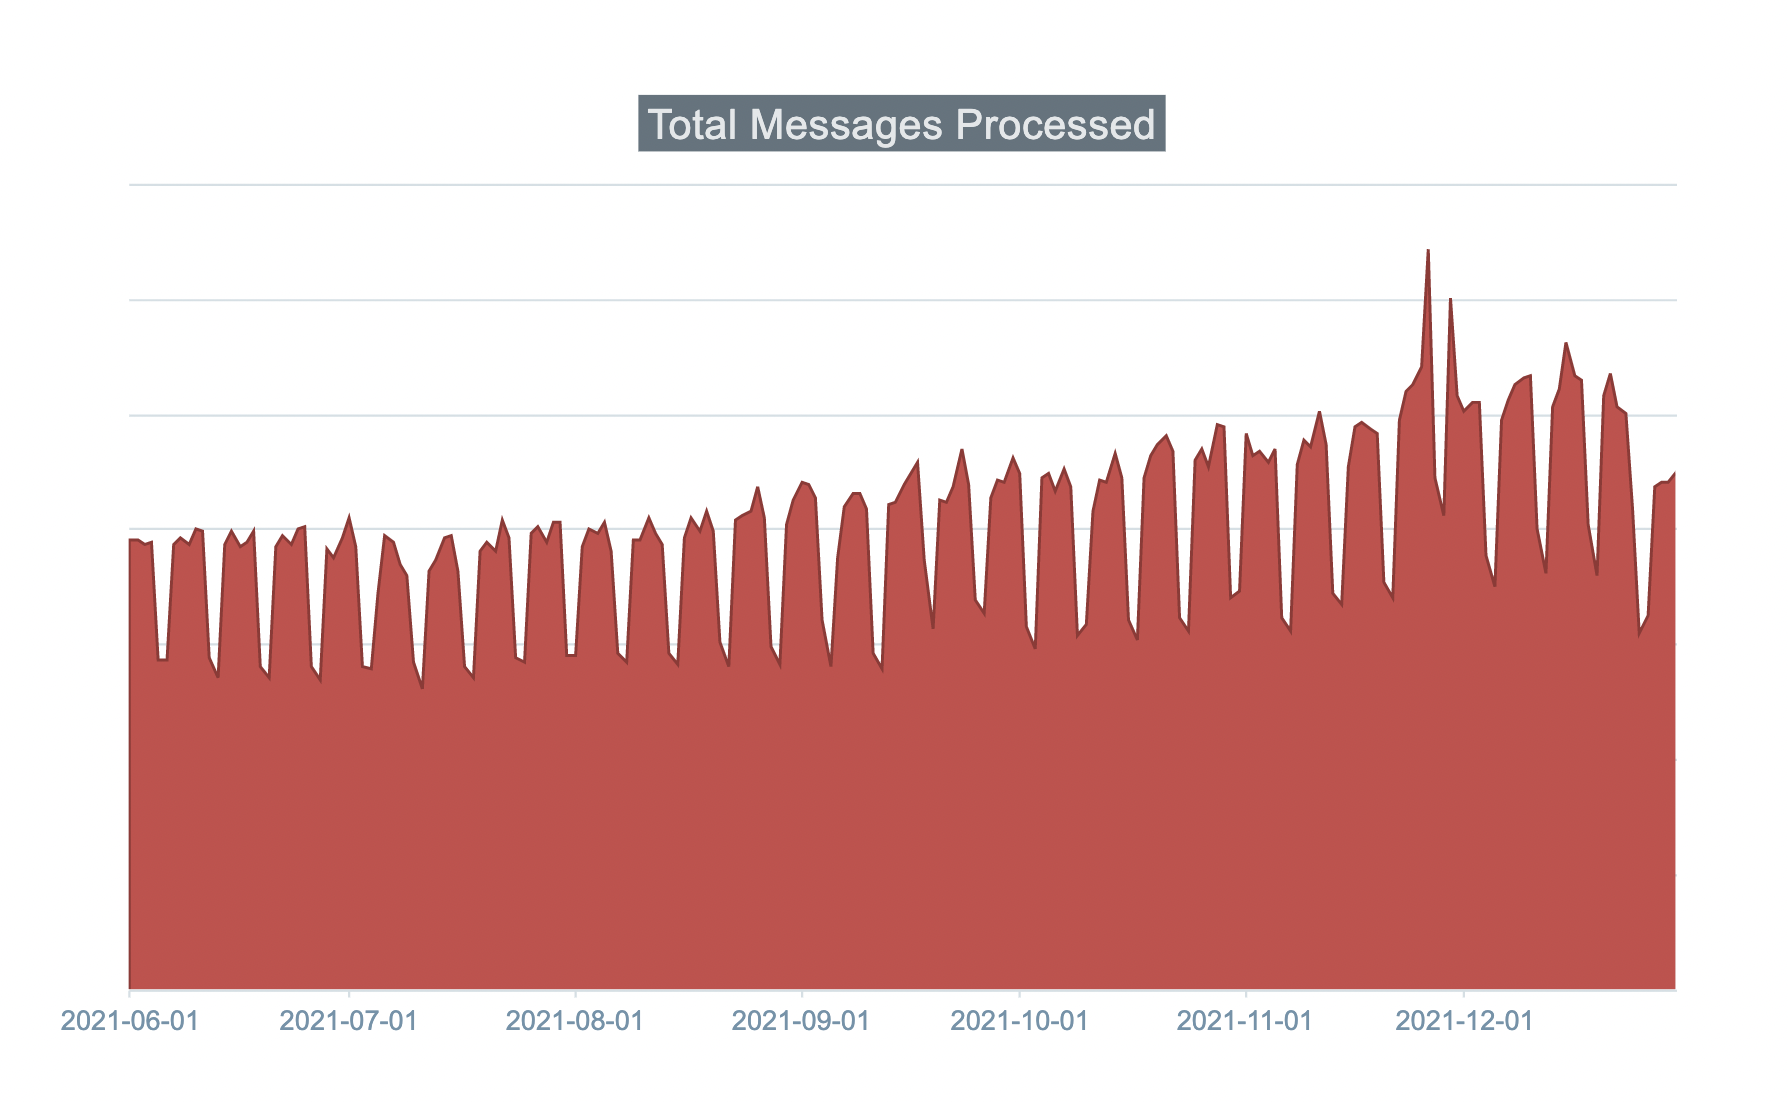 Total messages processed graph.